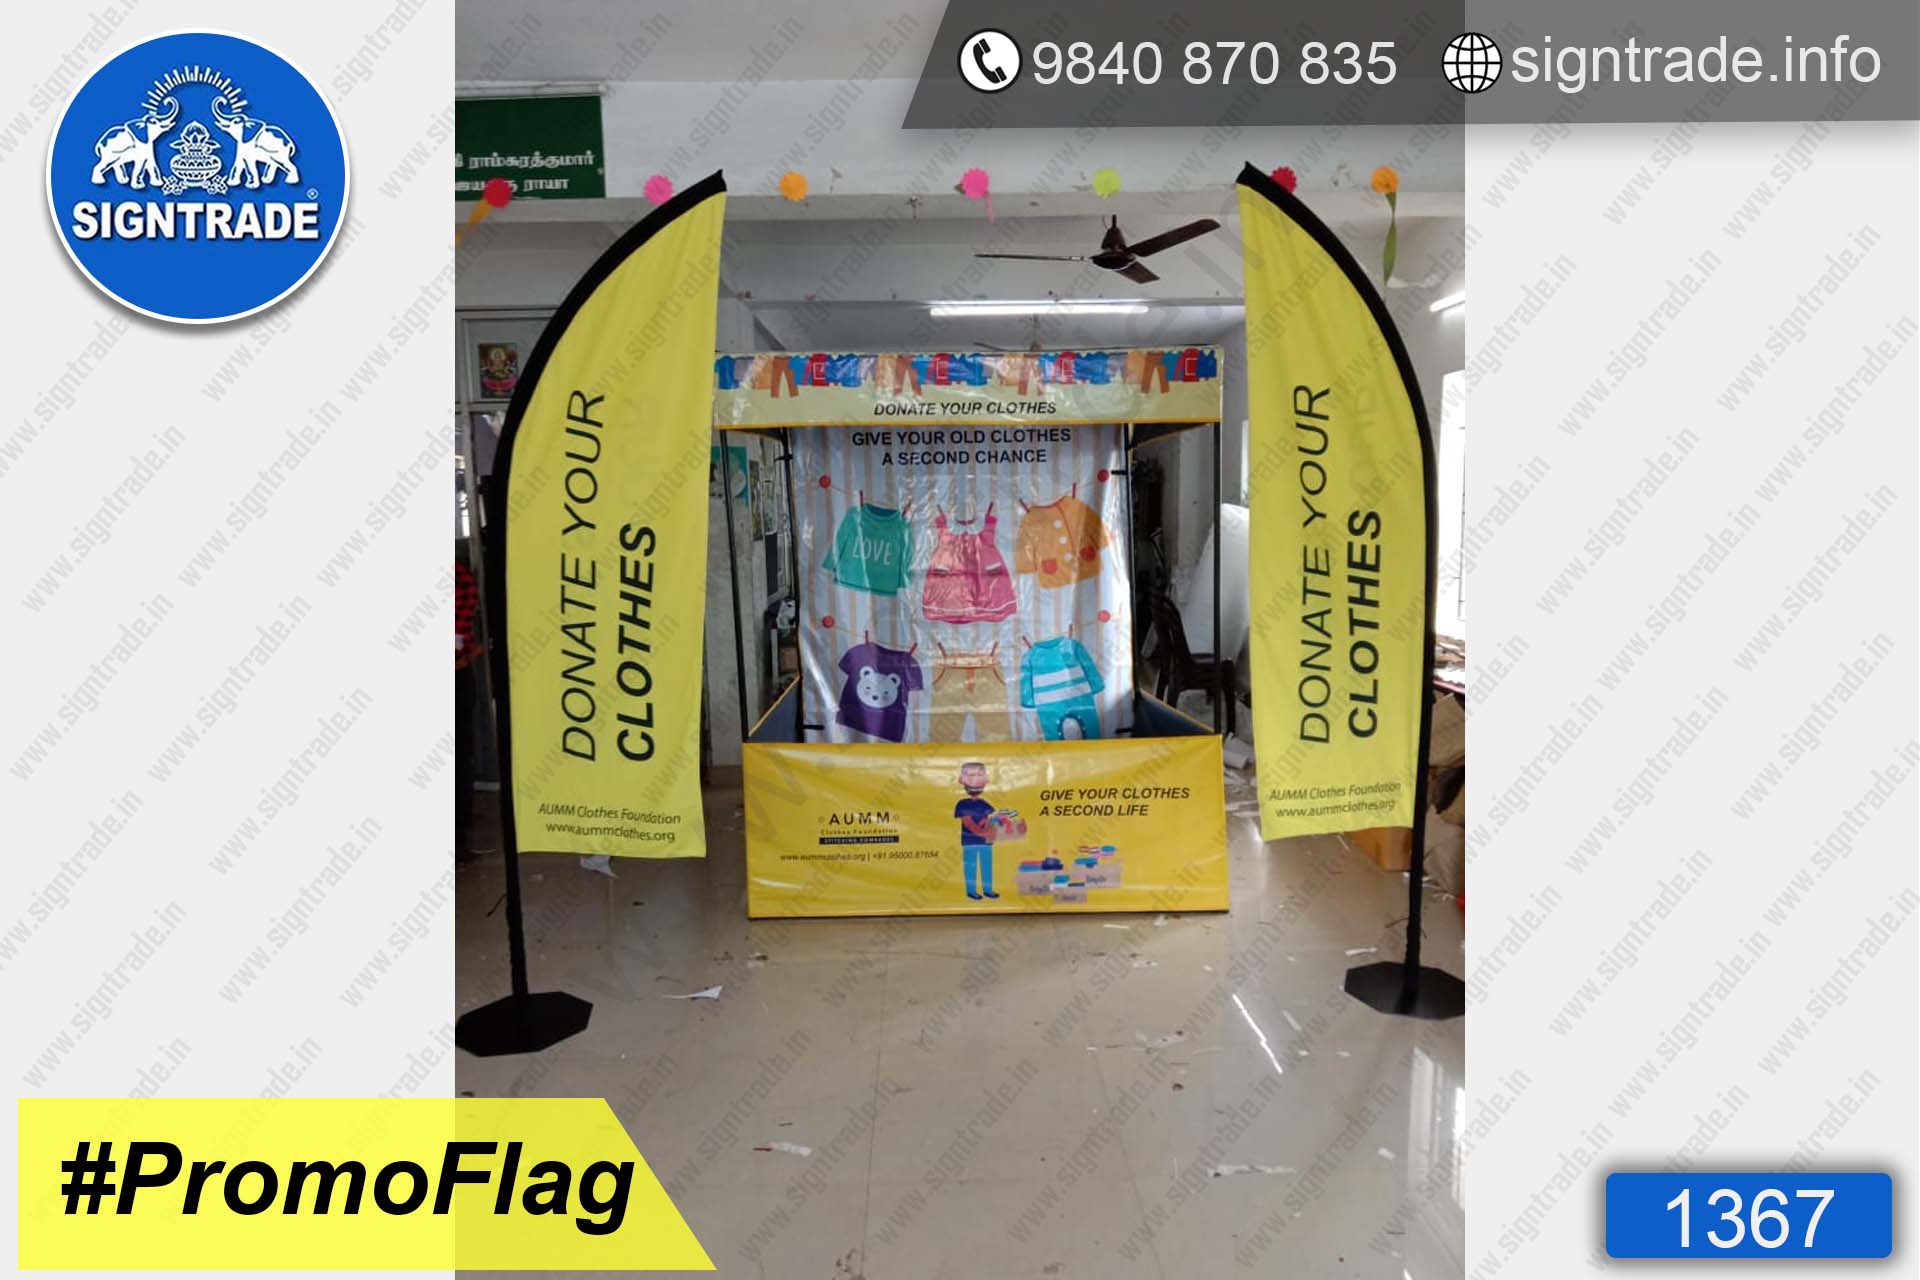 Donate Your Clothes - 1367, Flags, Flag, Promo Flag, Promotional Flags, Promotional Flag